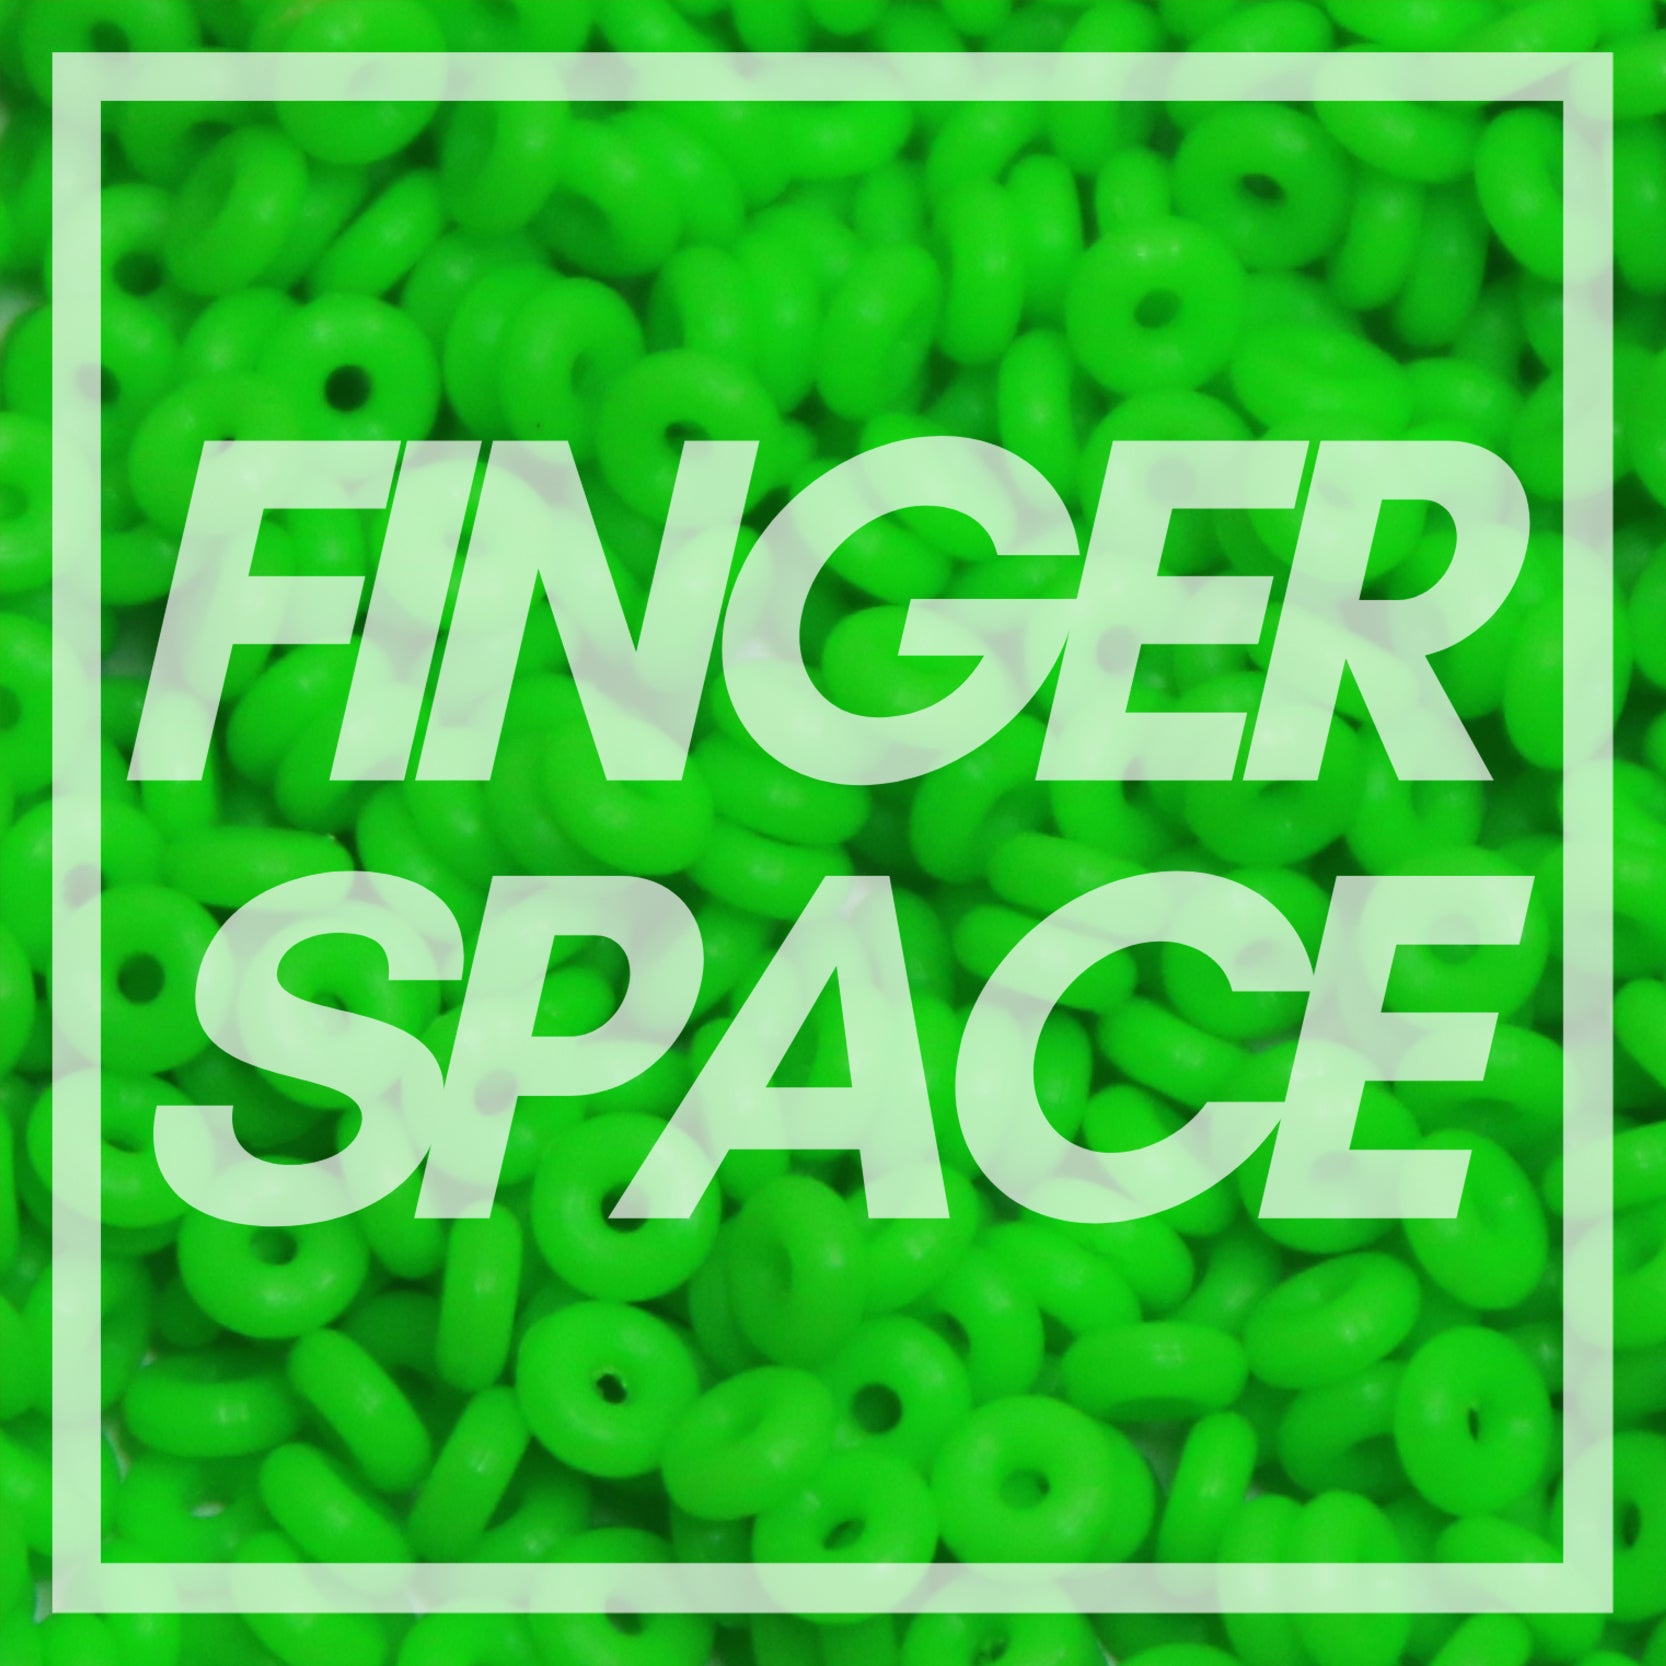 100-Pack of Green Silicone Fingerboard O-Ring Tuning